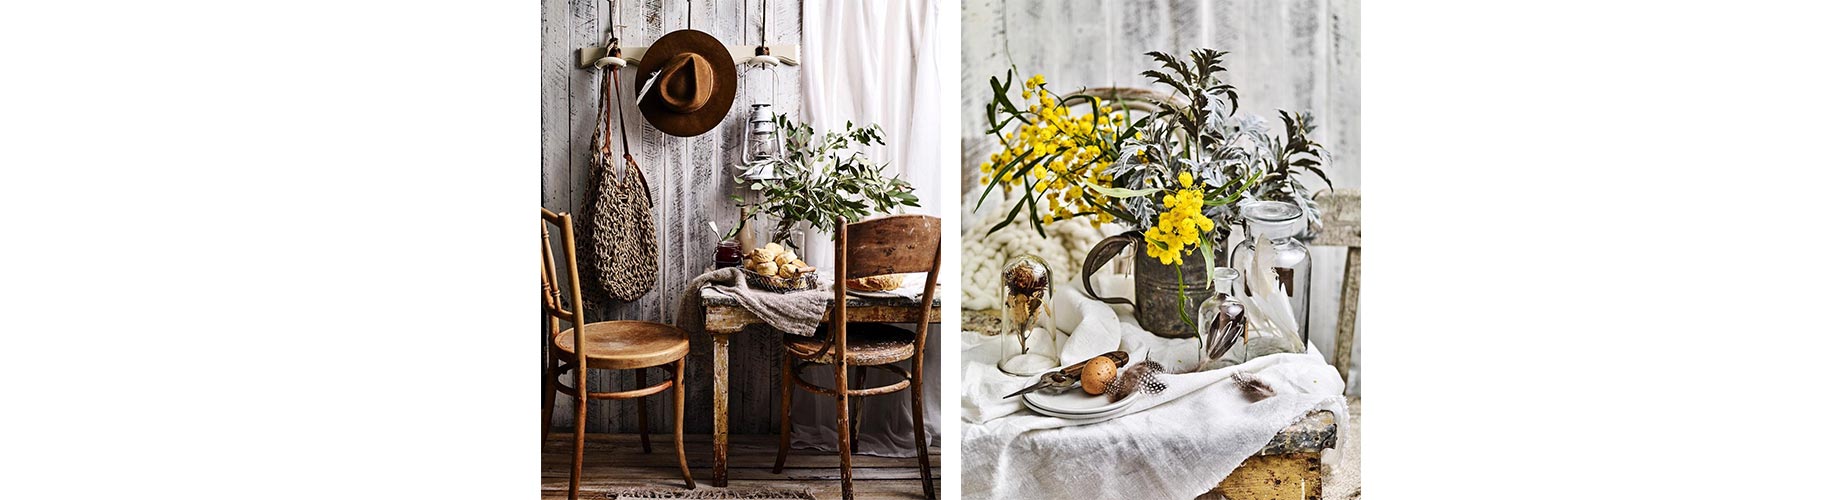 able with yellow wild flowers and rustic side table with bread